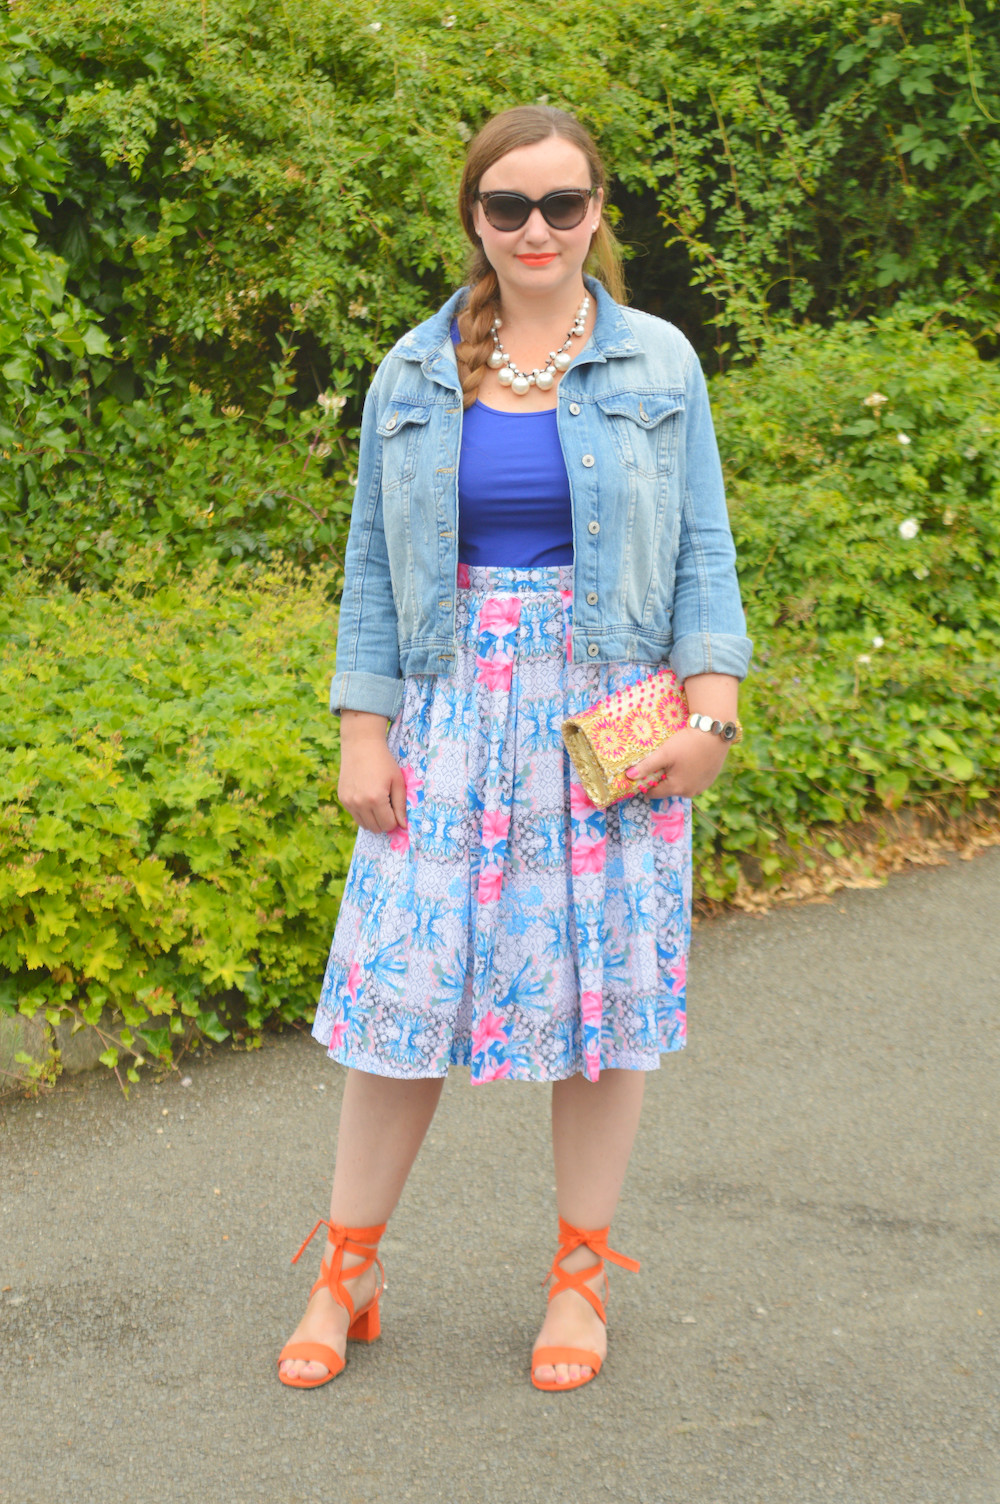 wearing a midi skirt with a denim jacket